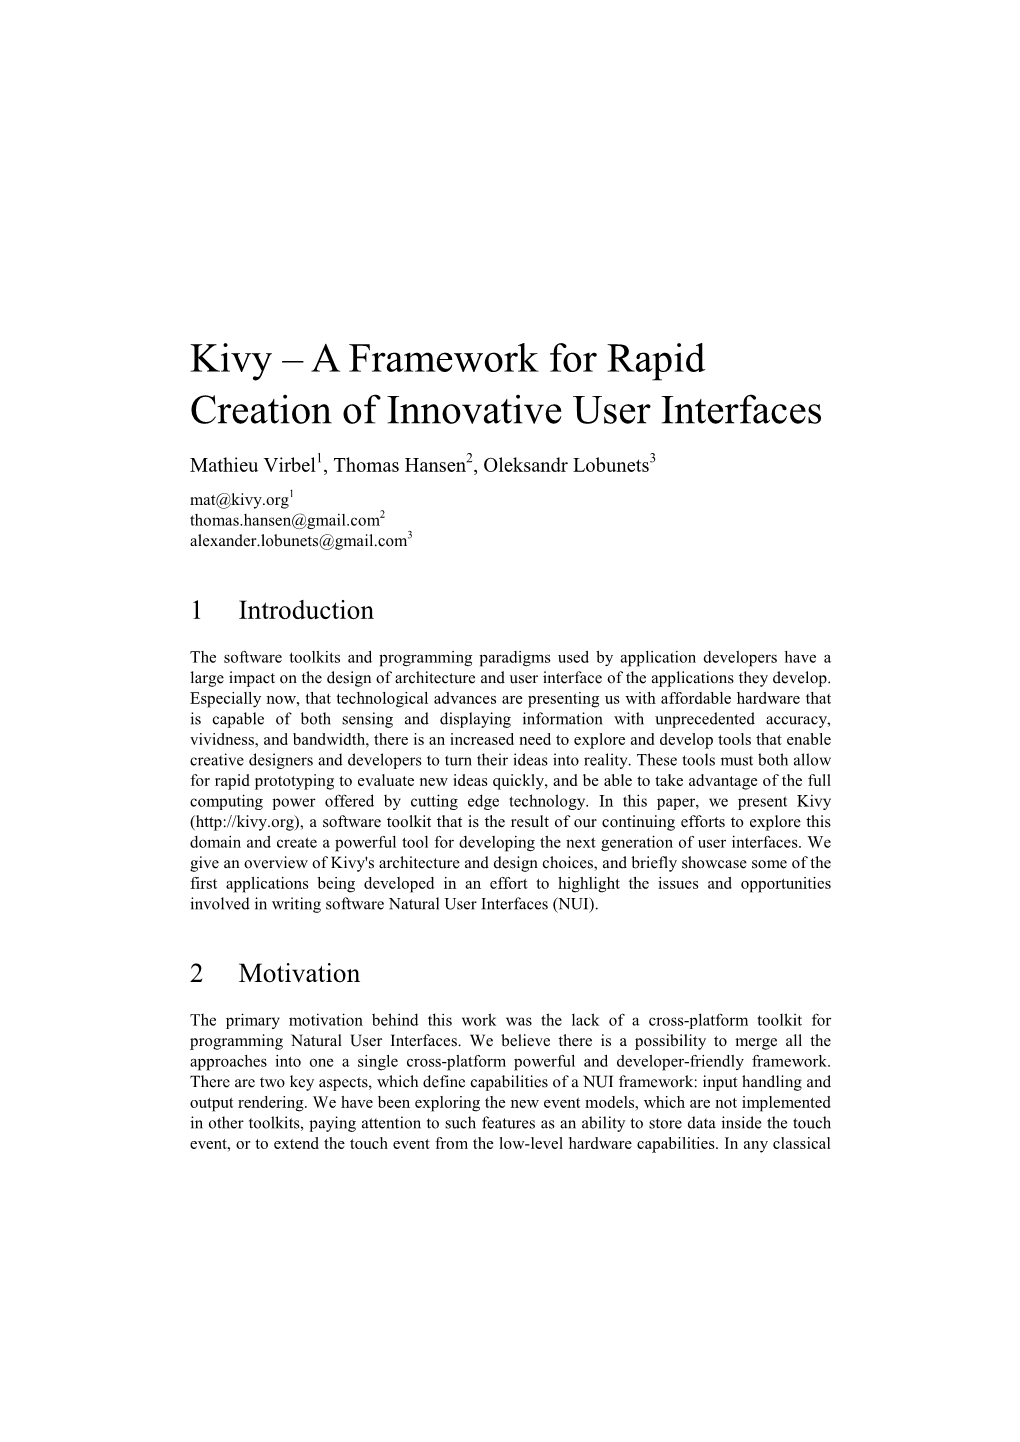 Kivy – a Framework for Rapid Creation of Innovative User Interfaces